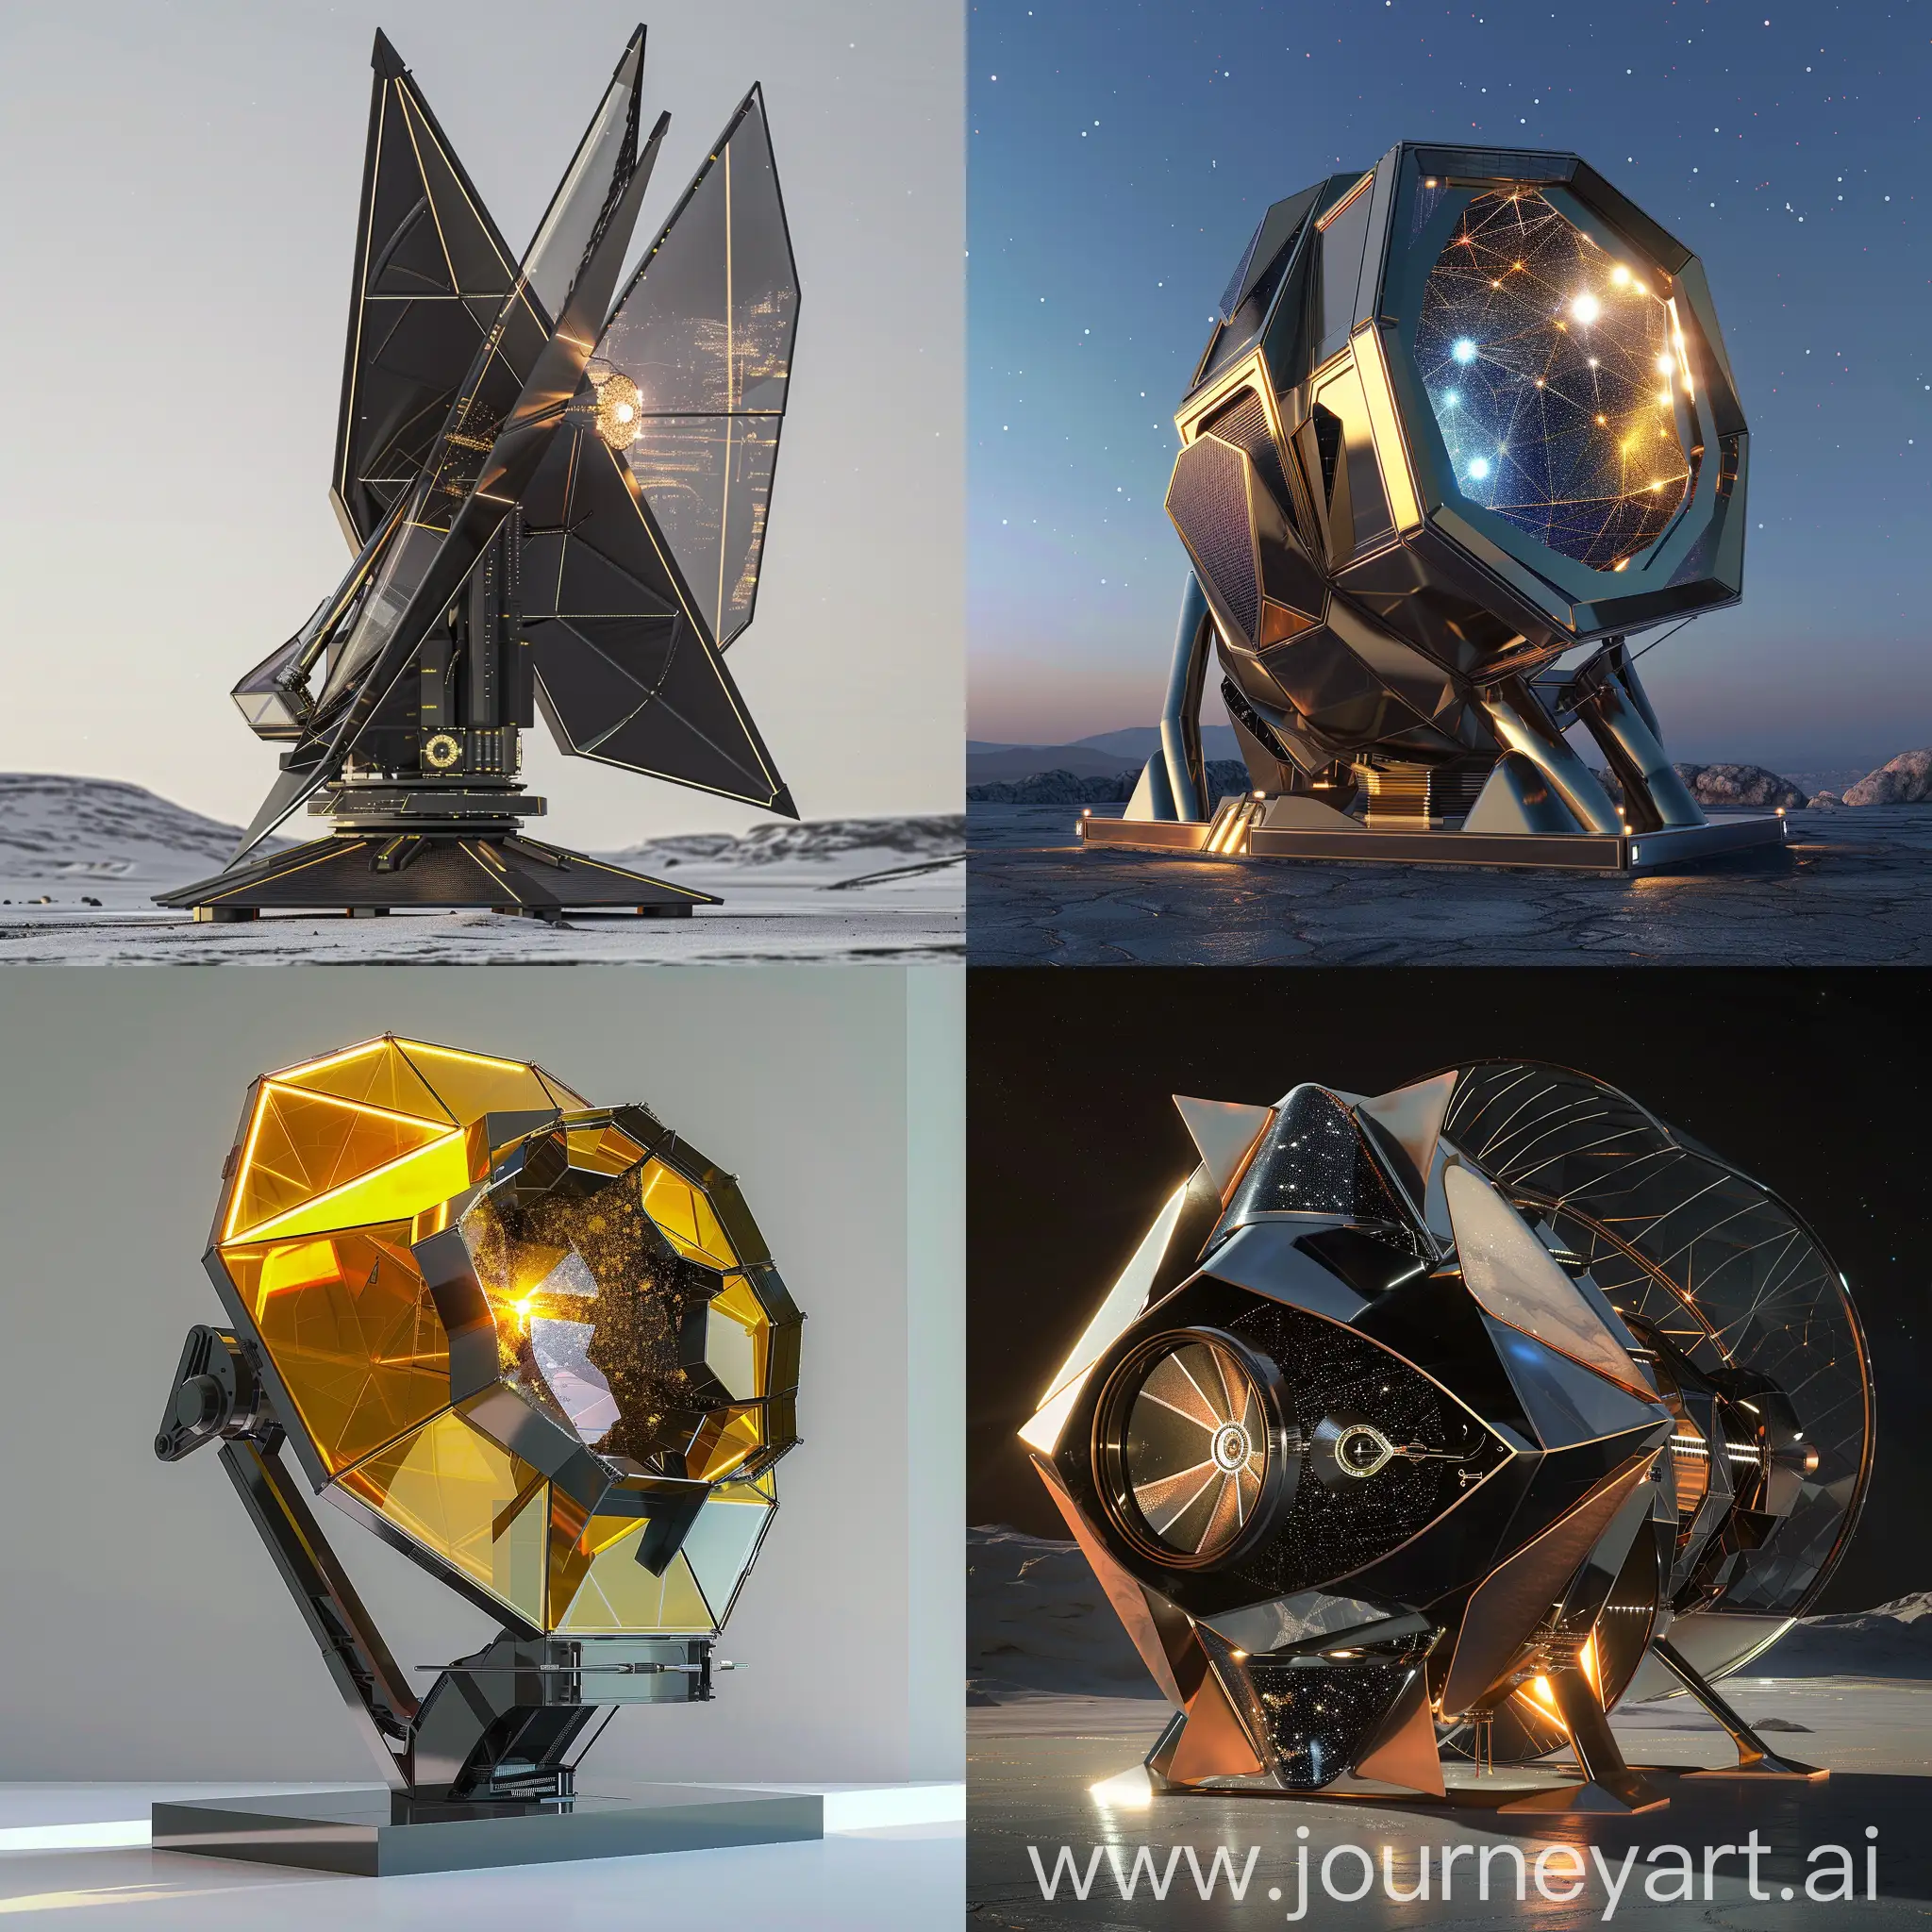 Futuristic space telescope, Modular Construction, Nano-Material Coatings, AI-Driven Calibration Systems, Holographic Optical Elements, Quantum Image Sensors, Solar Sail Power Source, 3D-Printed Components, Virtual Reality Integration, Kinetic Sculpture Radiators, Bio-Engineered Glass, Aerodynamic Silhouette, Dynamic Aperture Control, Interactive Light Displays, Morphing Solar Panels, Robotic Maintenance Arms, Thermal Shield Art, Electromagnetic Docking Rings, Sculptural Antennae, Reactive Hull Coatings, Holographic Identification Markers, unreal engine 5, unreal engine 5 rendering --stylize 1000